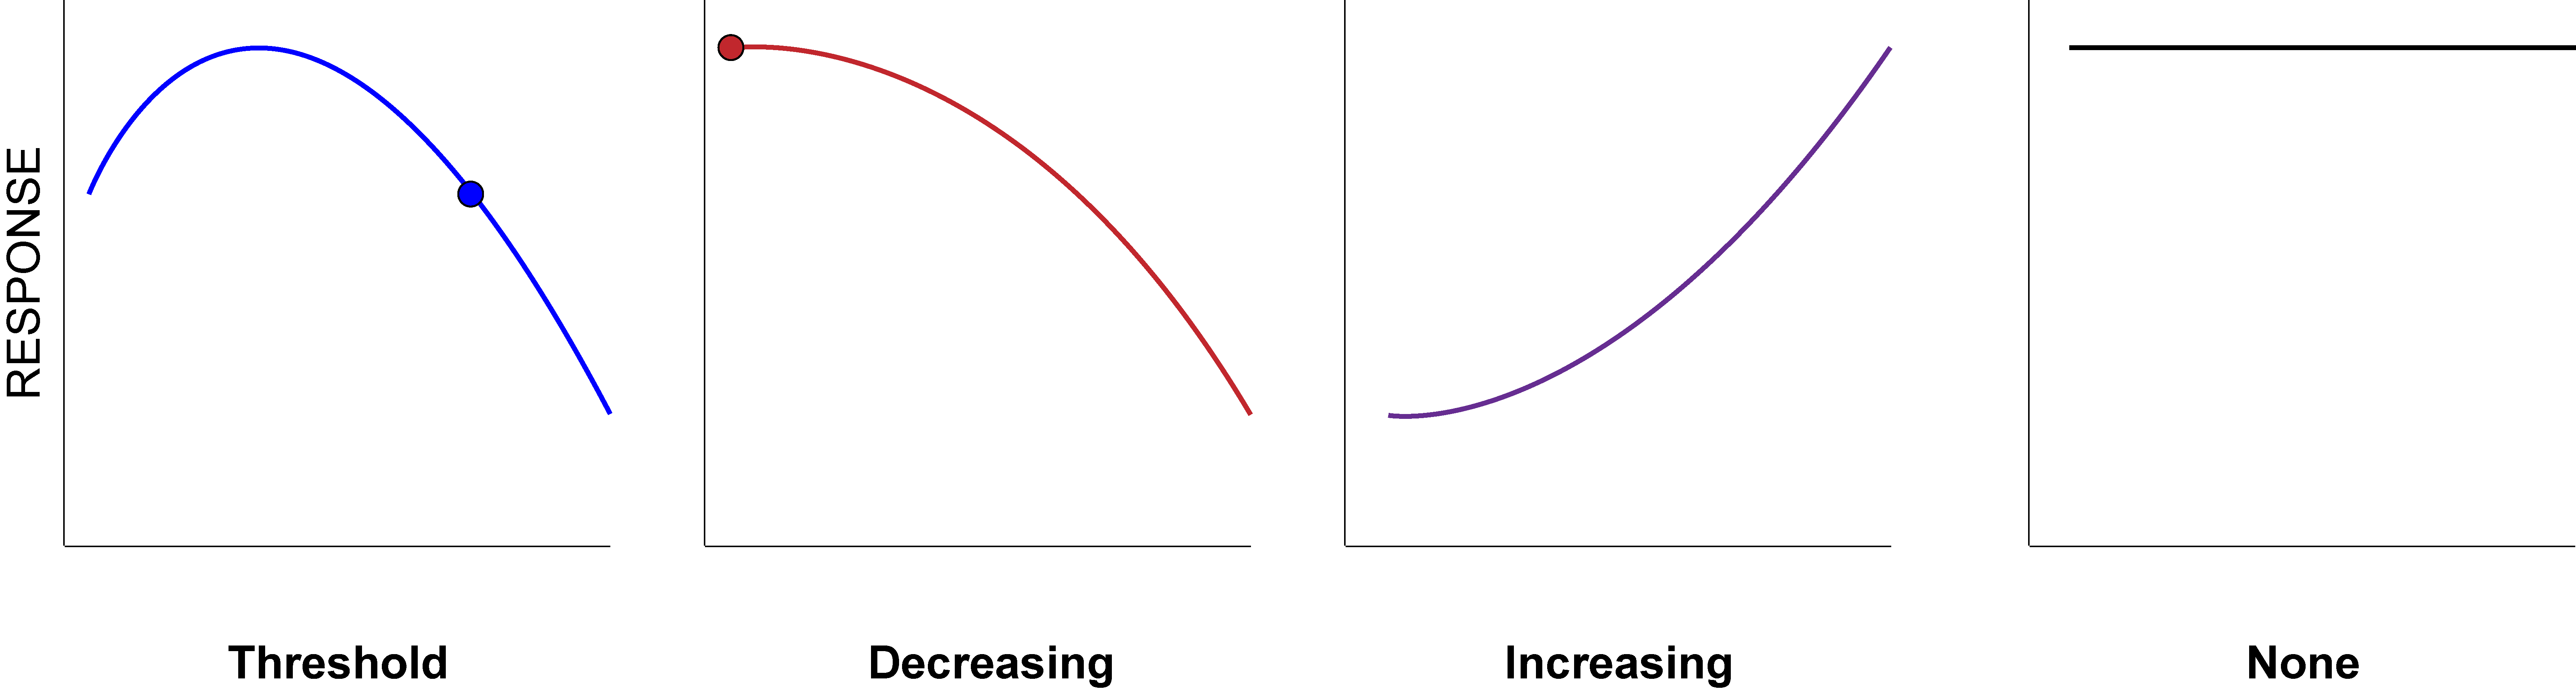 Four charts showing tree growth and survival response curves. From left to right: threshold, decreasing, increasing, none.